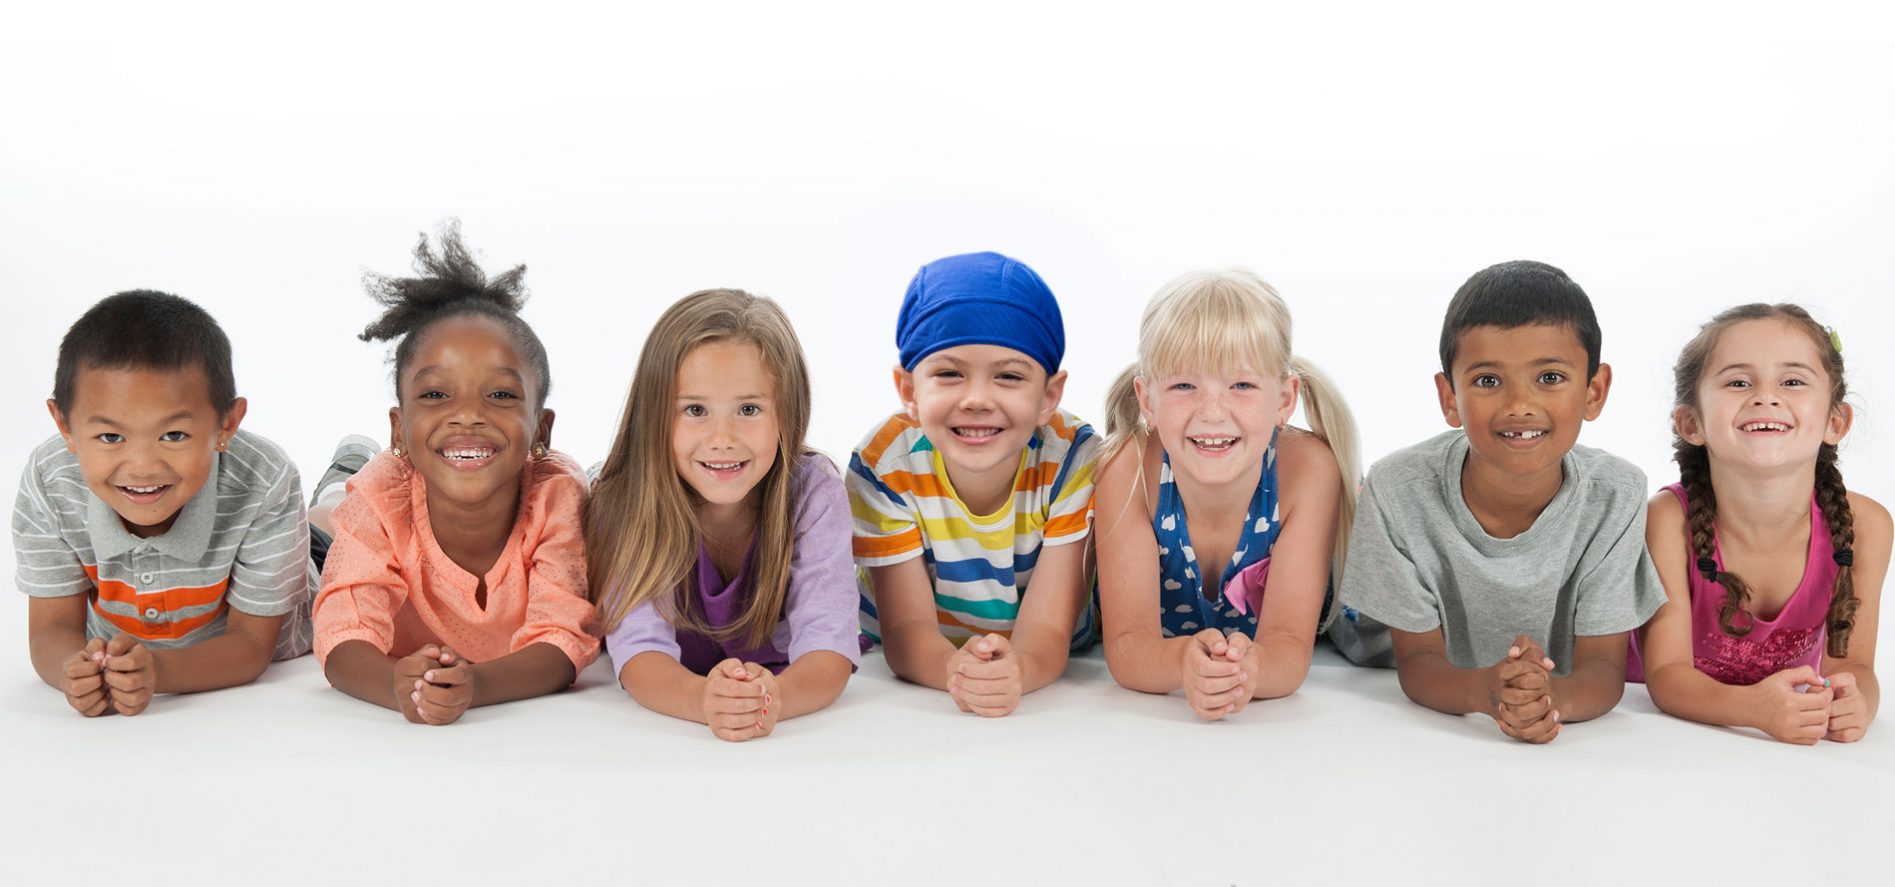 Make a Difference in Childrens Lives-The Foundation is Looking to Grow the Board of Trustees